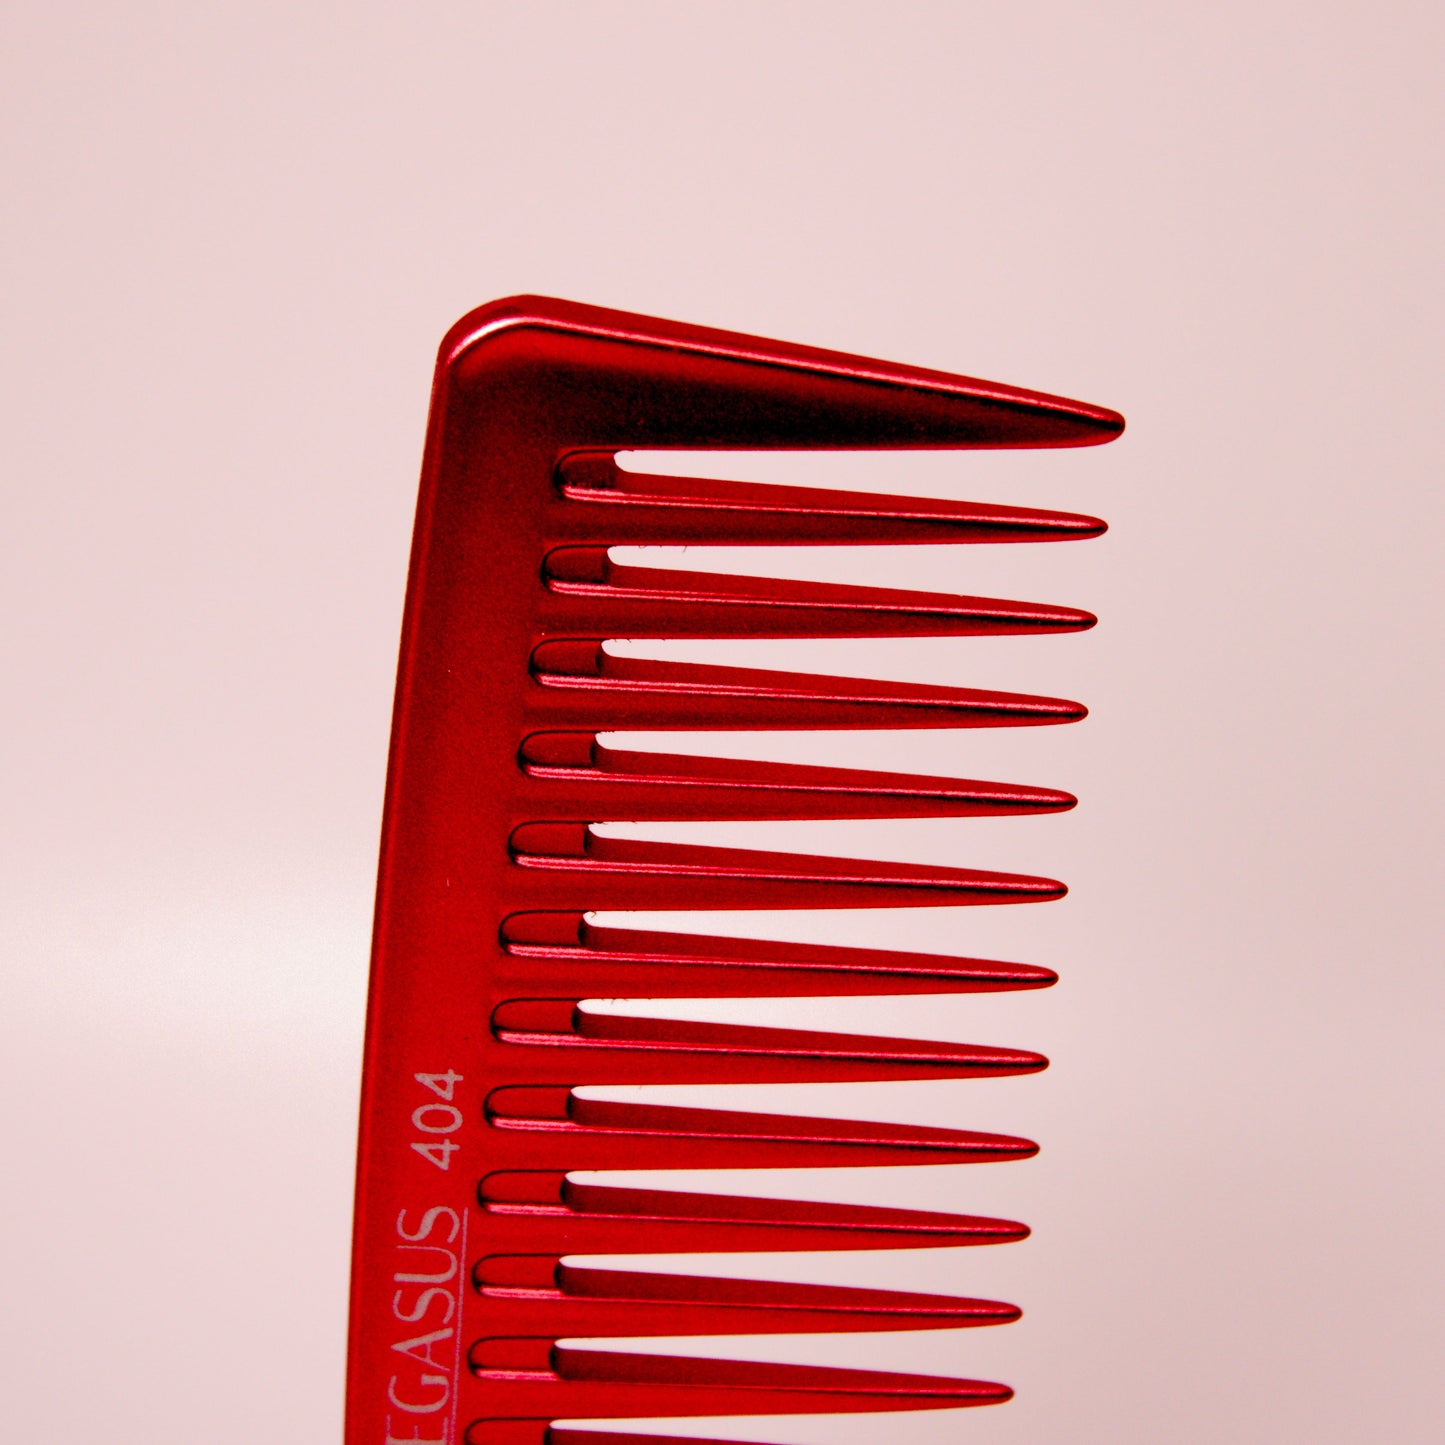 Pegasus MICOLOR 404, 7in Hard Rubber Wide Tooth Tall Styling Comb, Handmade, Seamless, Smooth Edges, Anti Static, Heat and Chemically Resistant, Wet Hair, Everyday Grooming Comb | Peines de goma dura - Copper